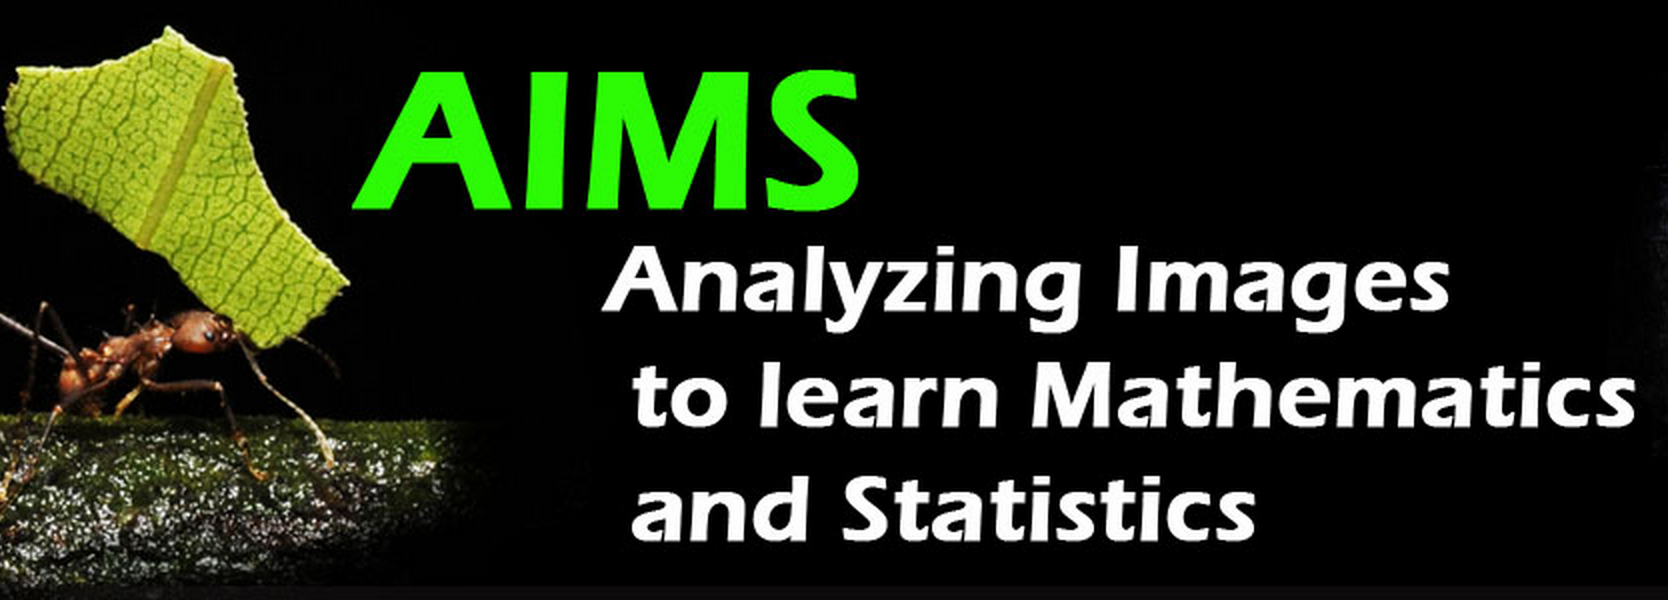 AIMS: Analyzing Images to learn Mathematics and Statistics group image